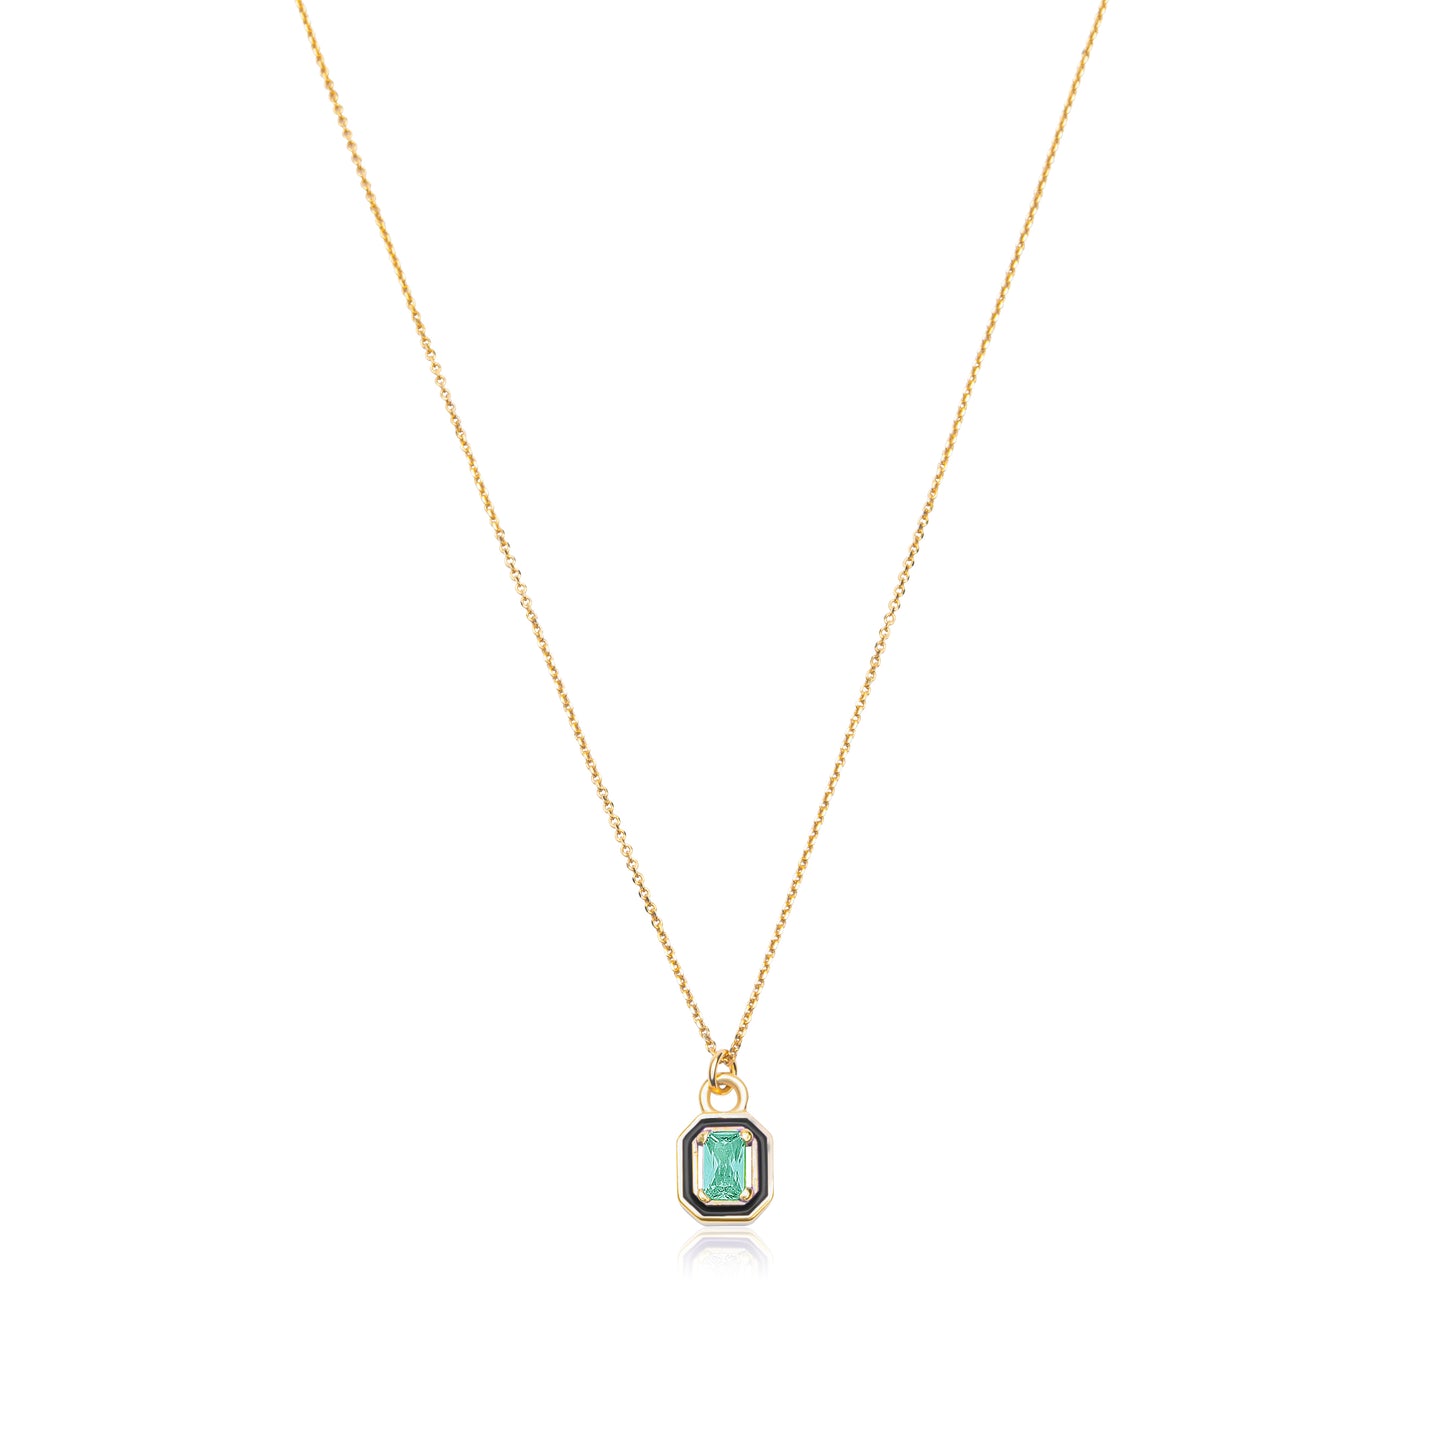 Emerald Cut with Emerald Stone and Black Enamel Necklace  - Gold Plated